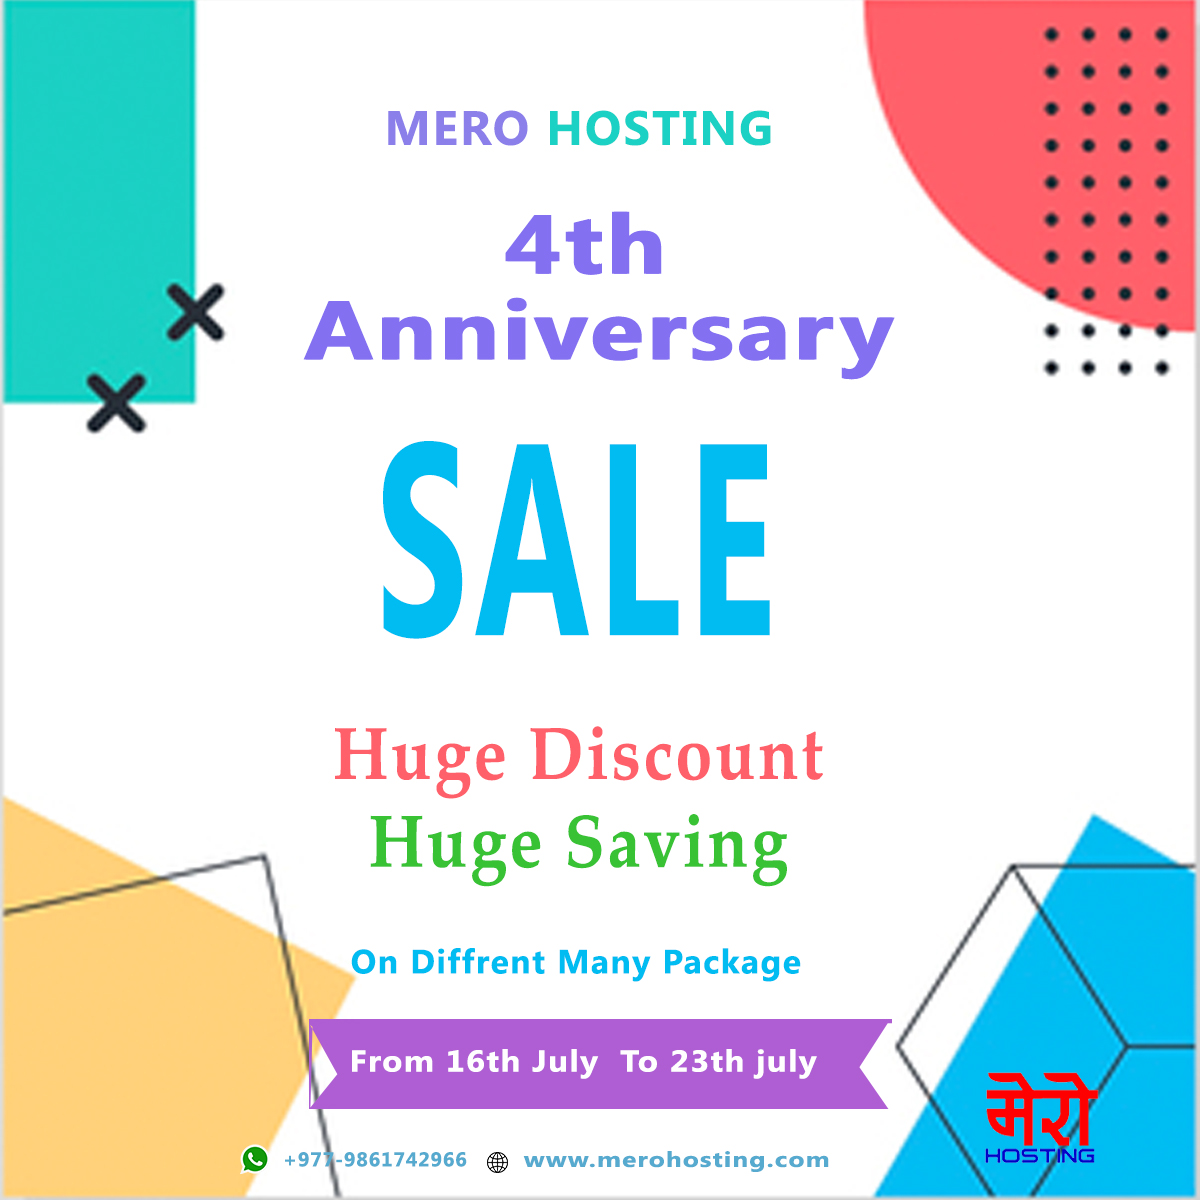 Mero Hosting Fourth (4th) Anniversary Huge Discount And Huge Saving Offer On MeroHosting